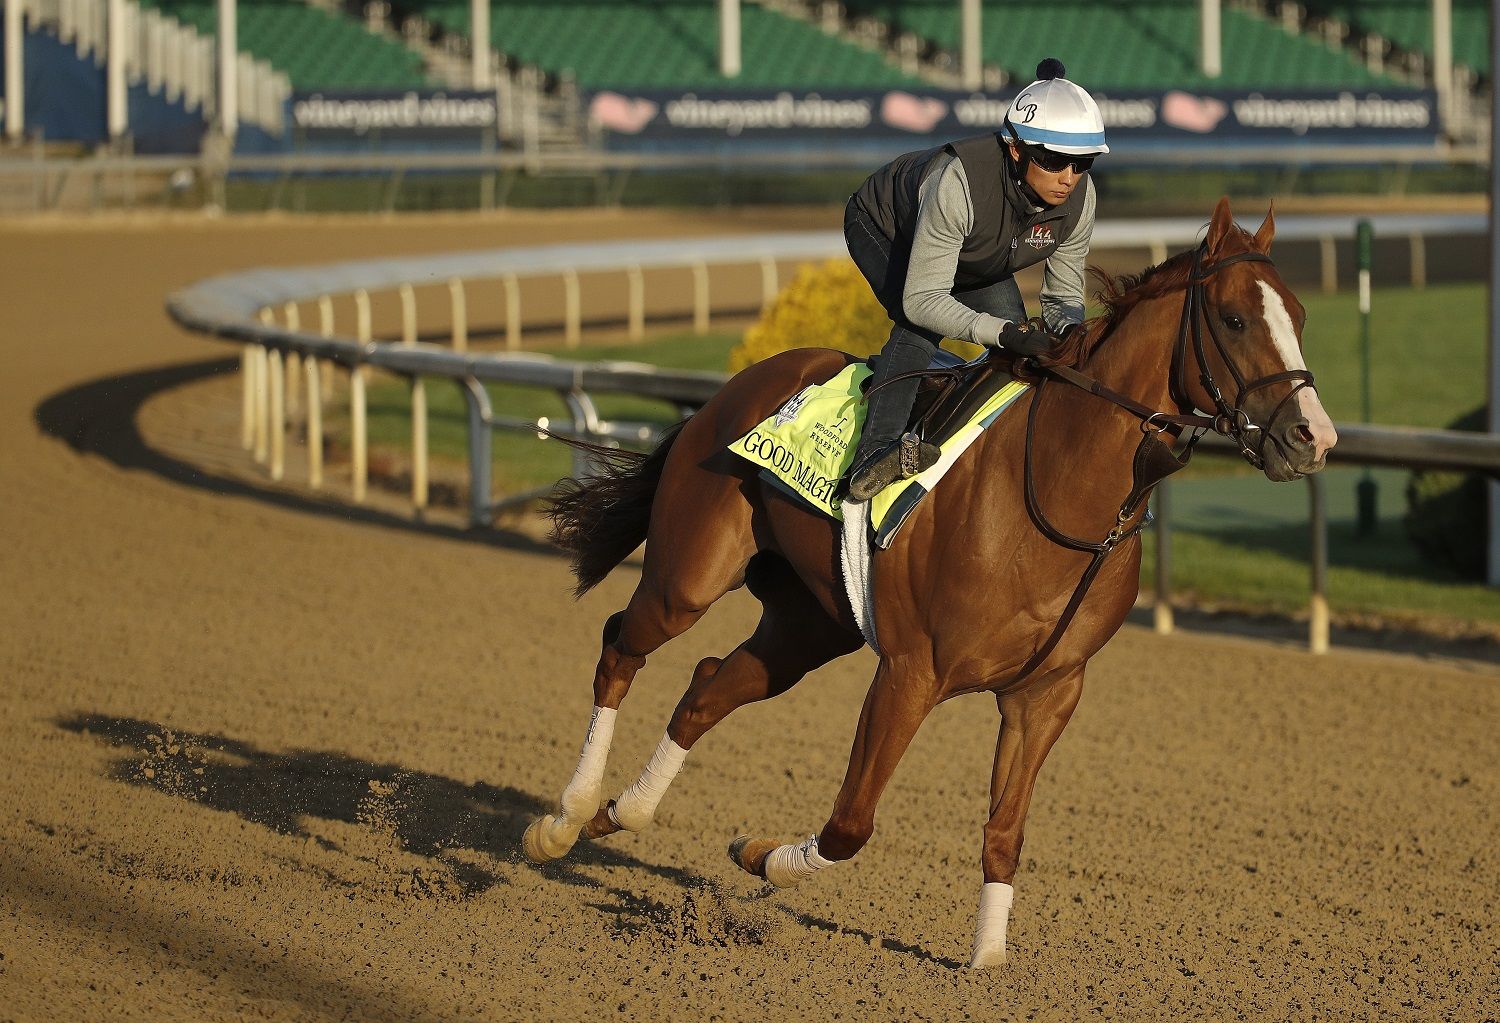 Kentucky Derby hopeful Good Magic runs during a morning workout at Churchill Downs Tuesday, May 1, 2018, in Louisville, Ky. The 144th running of the Kentucky Derby is scheduled for Saturday, May 5. (AP Photo/Charlie Riedel)